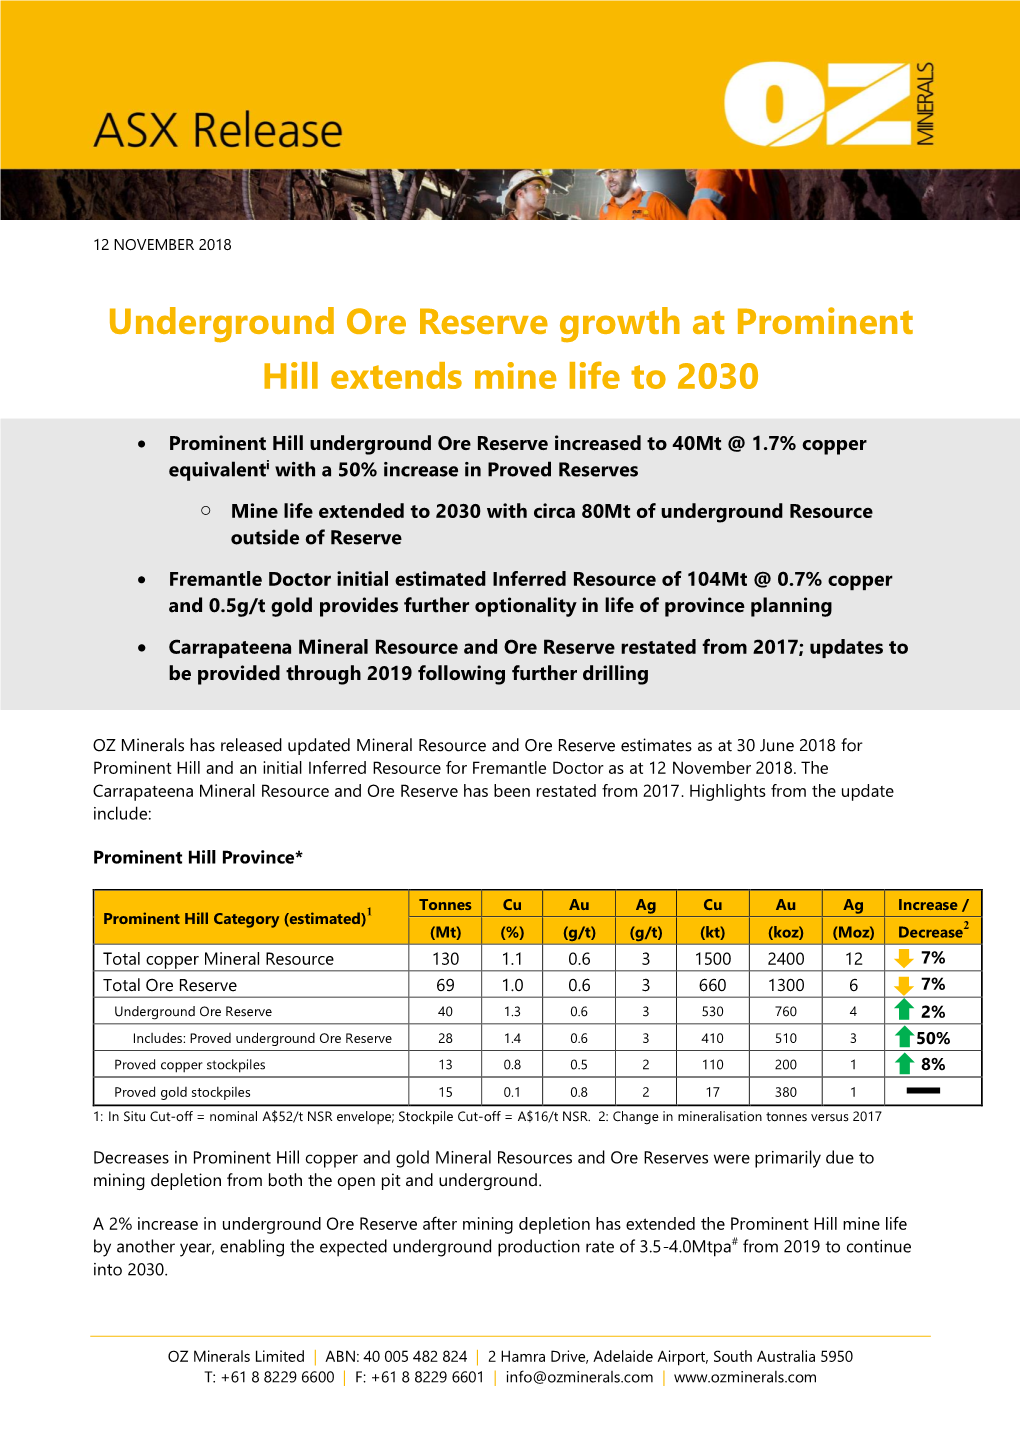 Underground Ore Reserve Growth at Prominent Hill Extends Mine Life to 2030